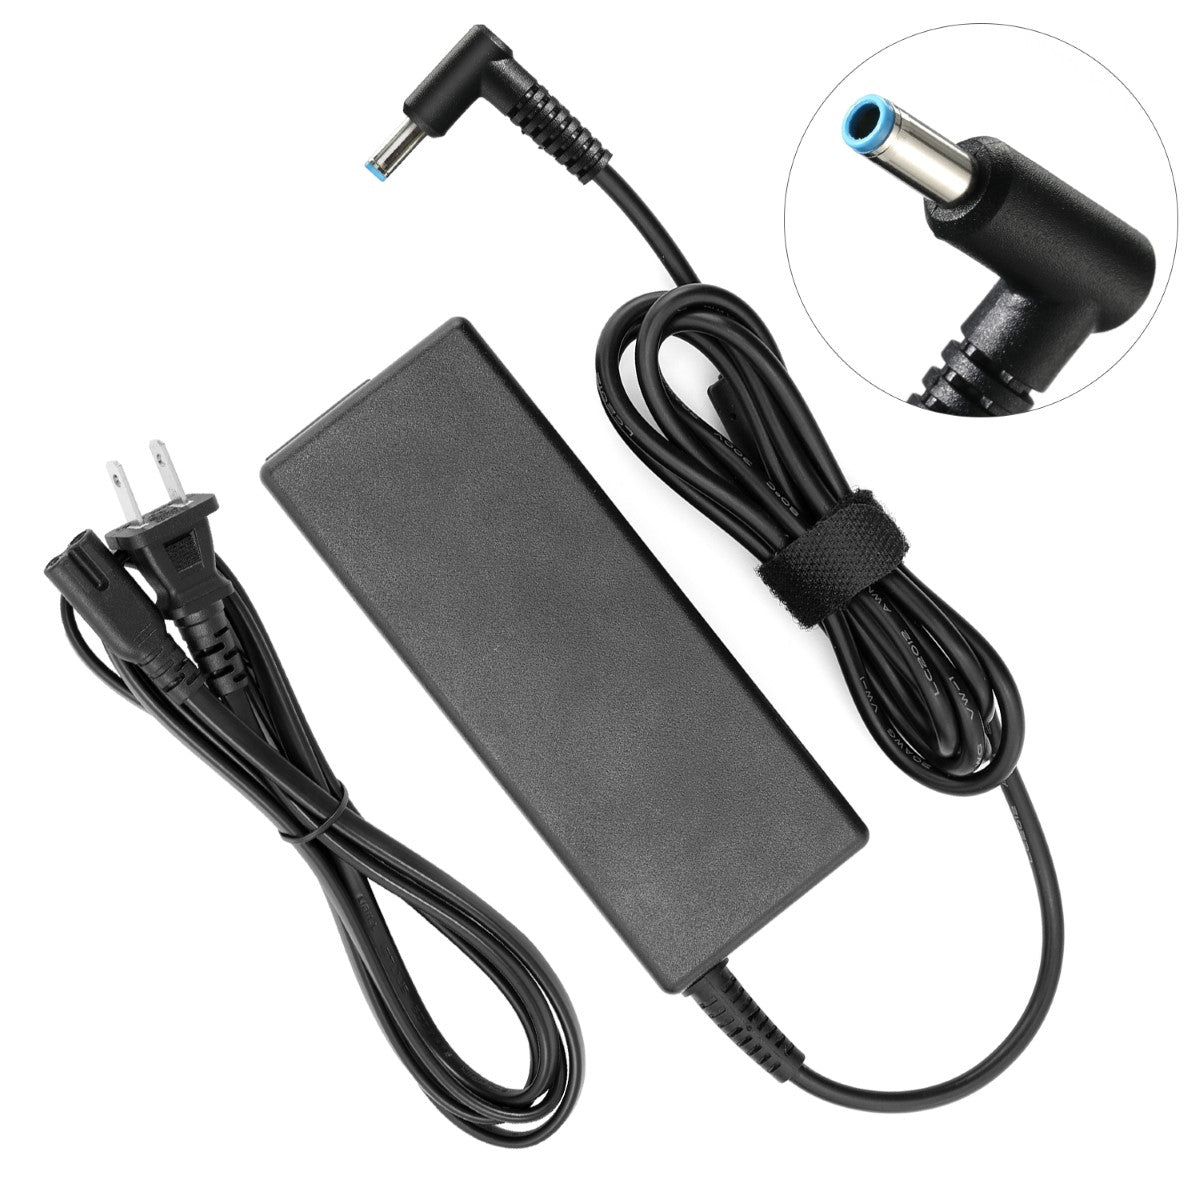 AC Adapter Charger for hp Envy Touchsmart 15-k118nr Notebook.